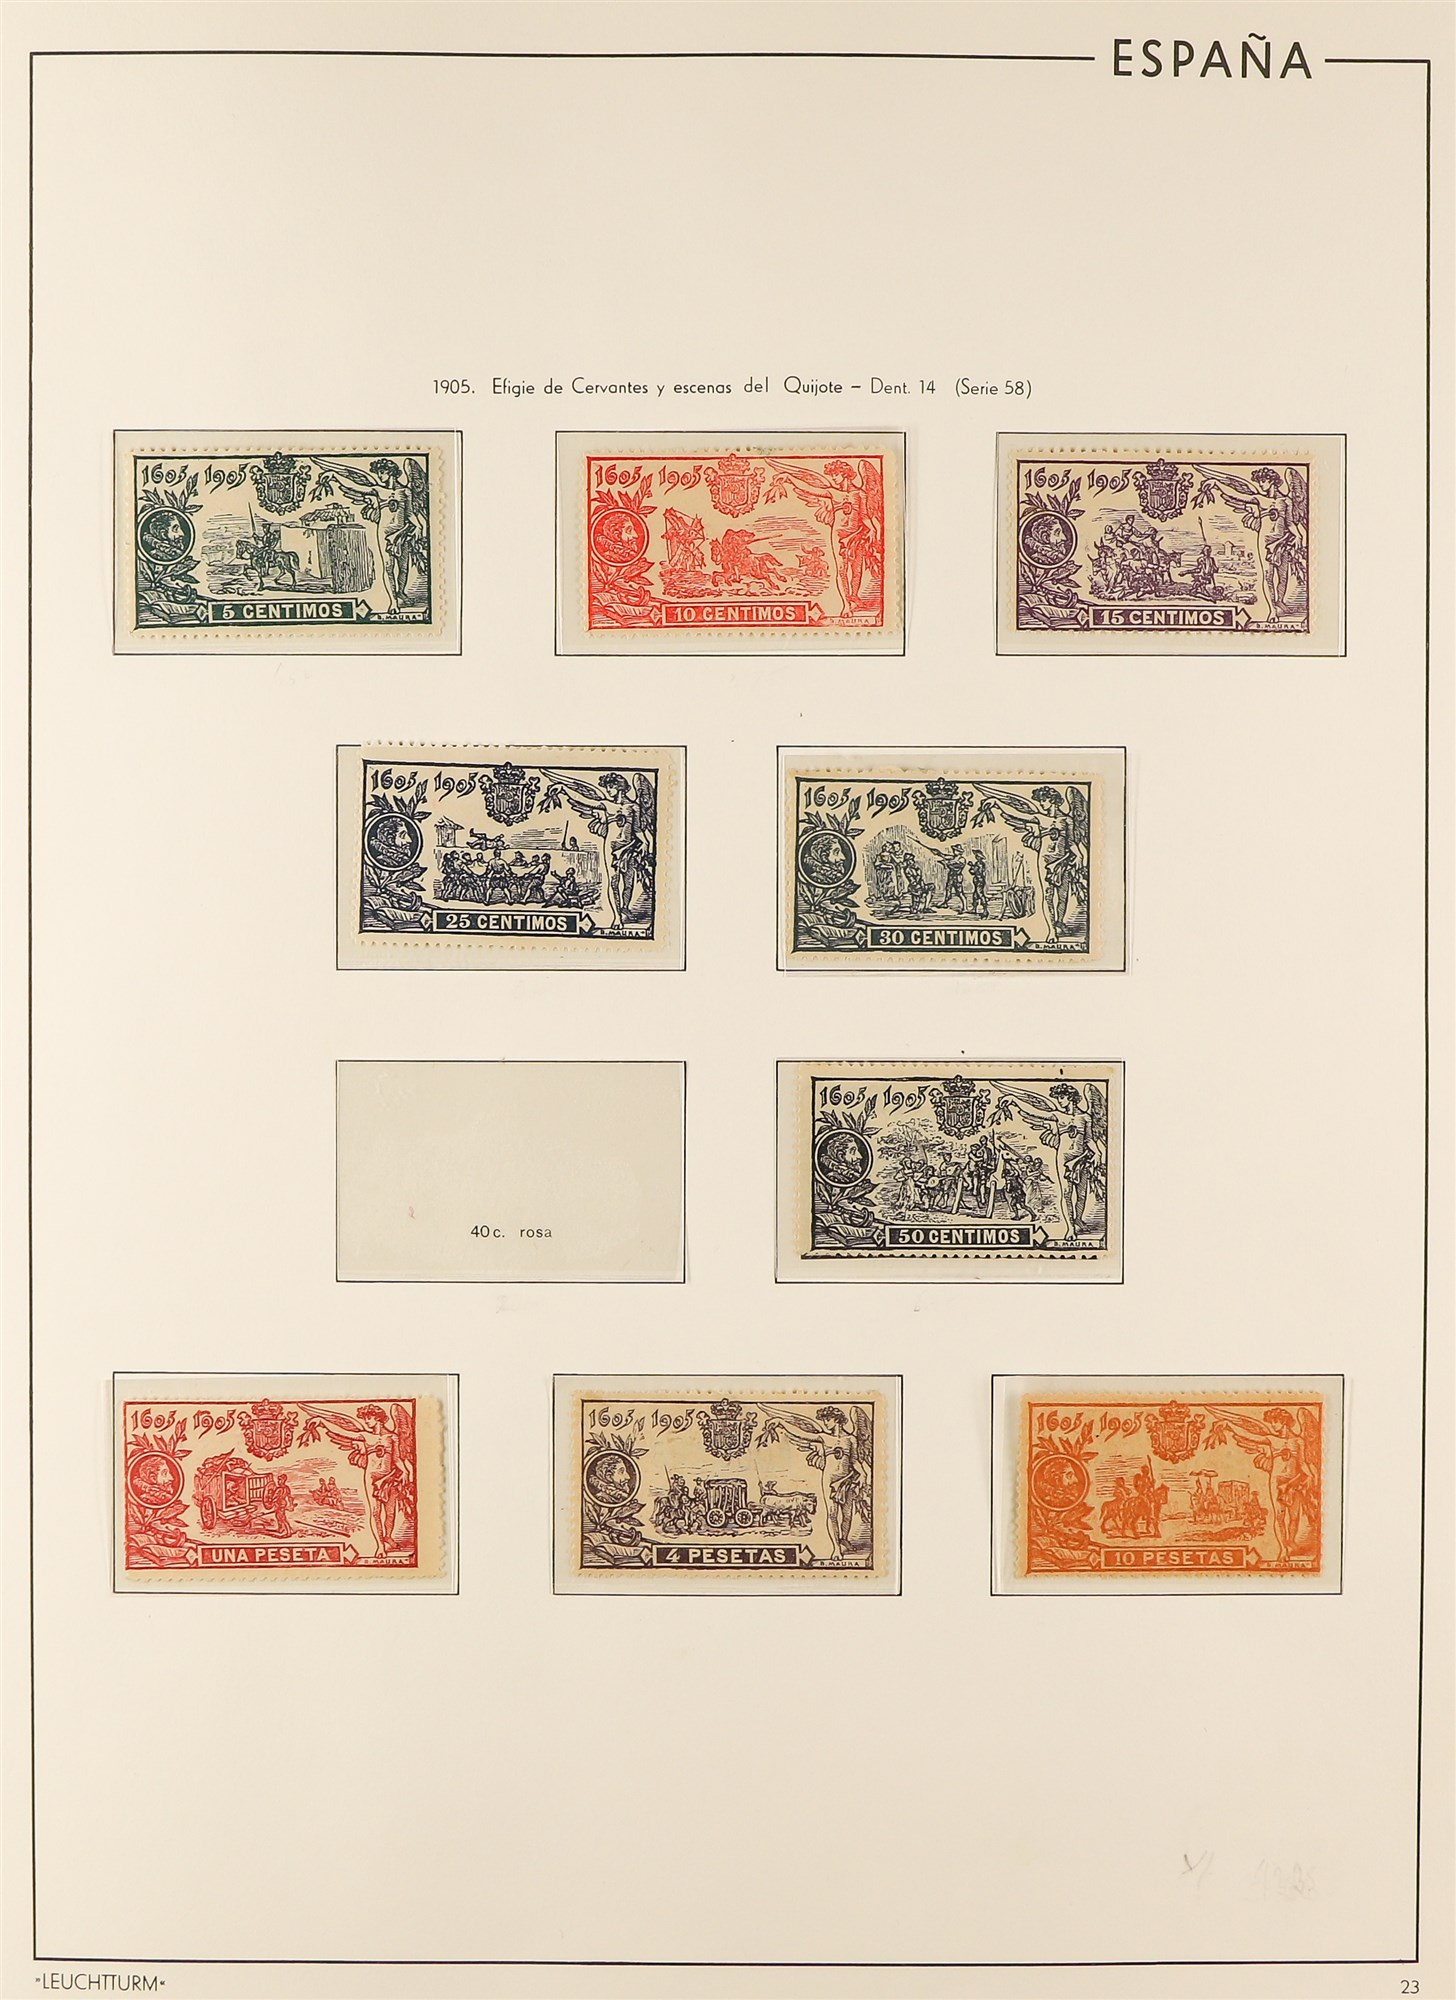 SPAIN 1901 - 1916 COLLECTION of 49 mint stamps on Davo Espana hingeless album pages, cat €1347.